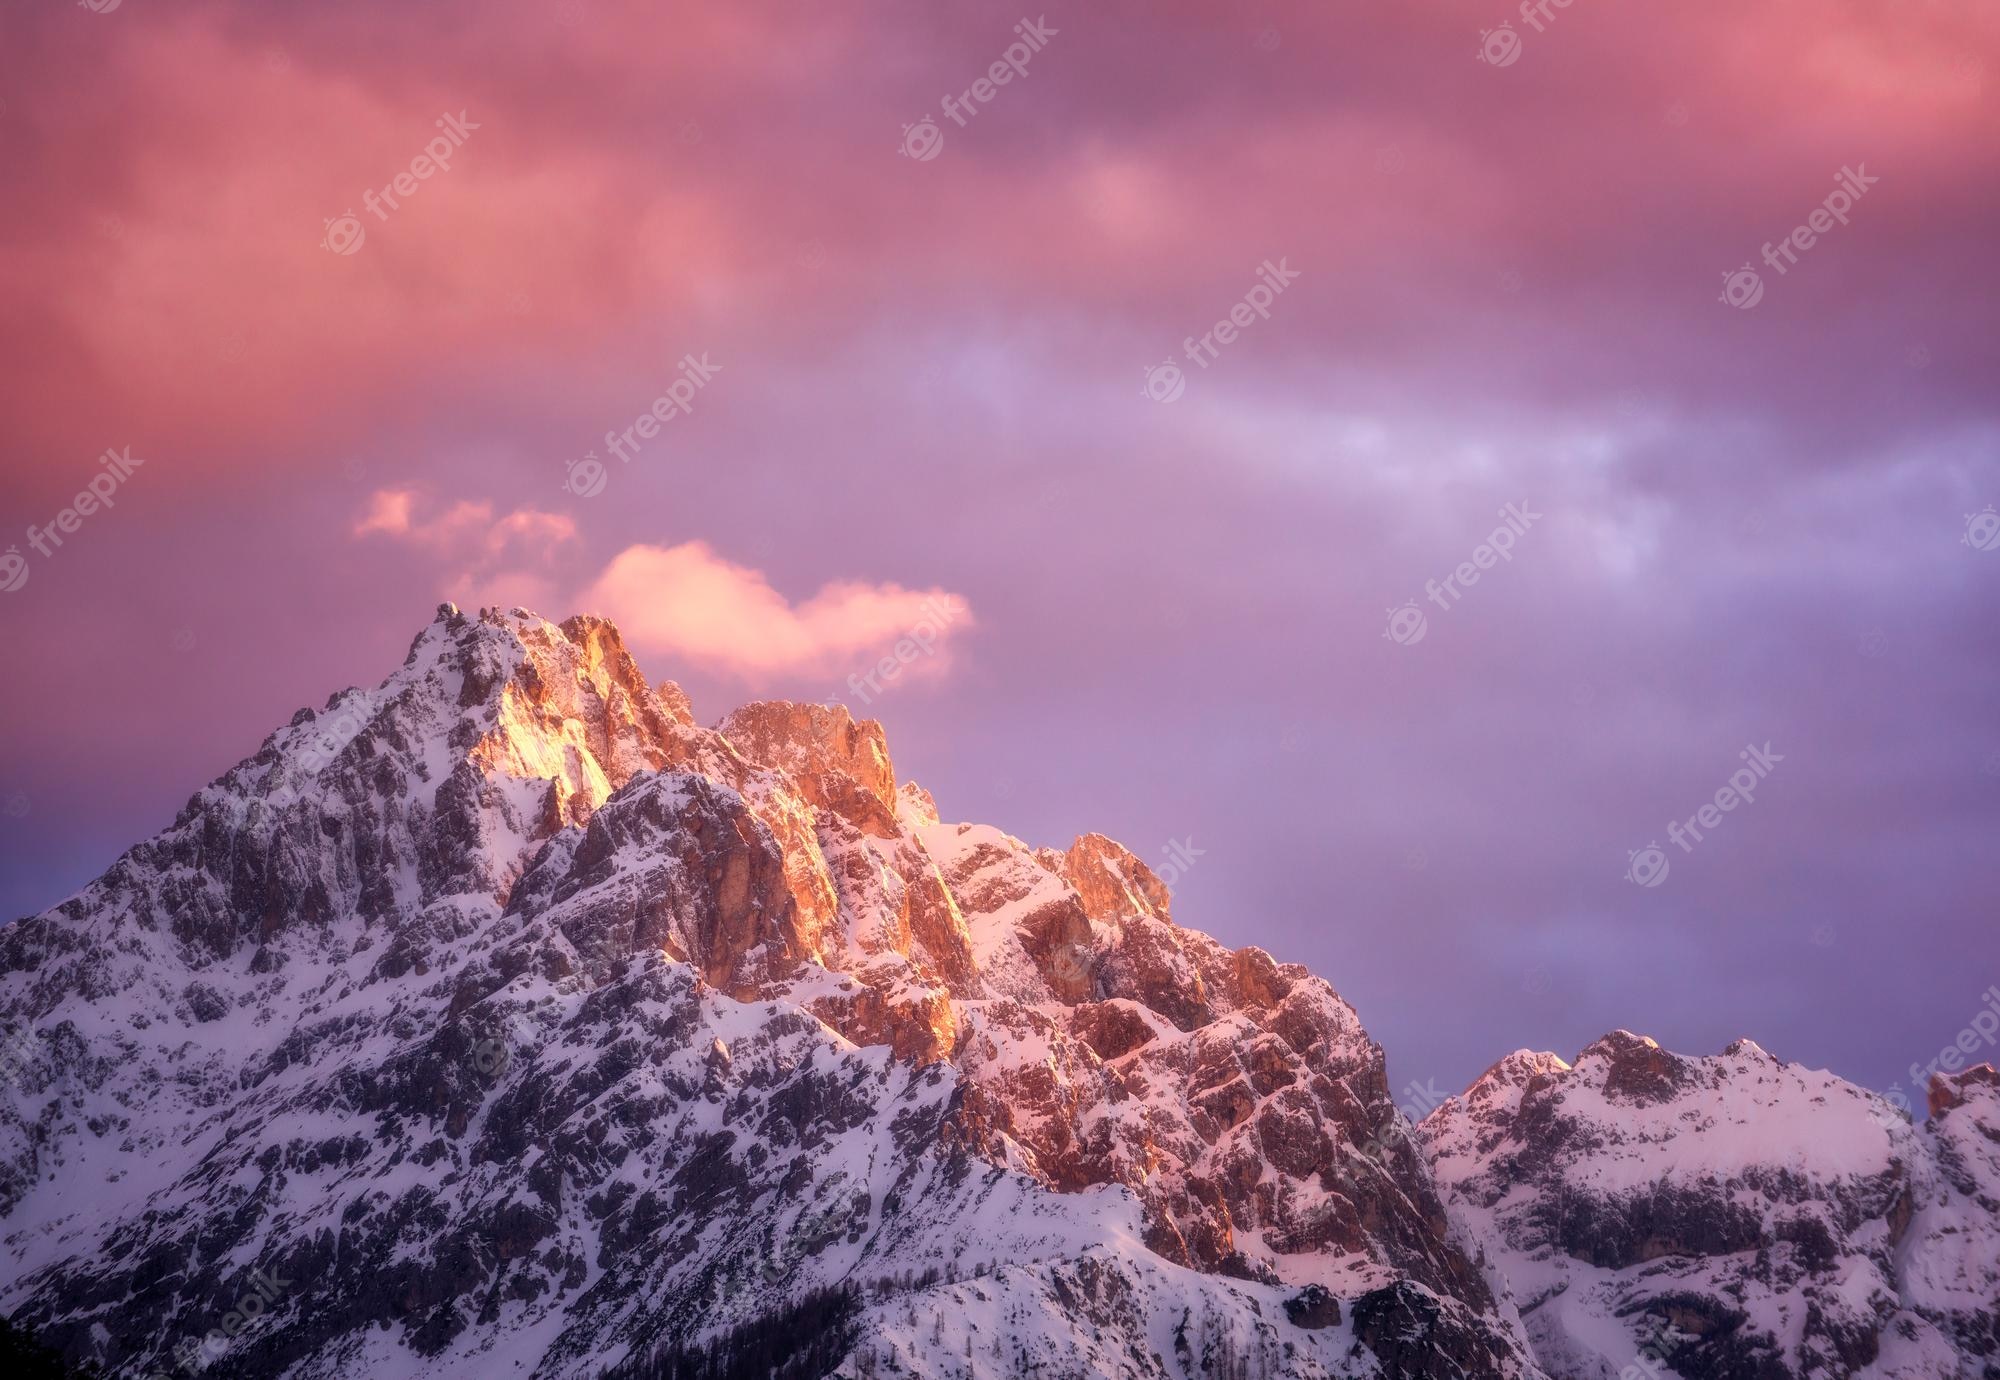 Premium Photo. Beautiful mountain peaks in snow and violet sky with pink clouds in winter at sunset colorful landscape with high snowy rocks cloudy purple sky in cold evening alpine mountains